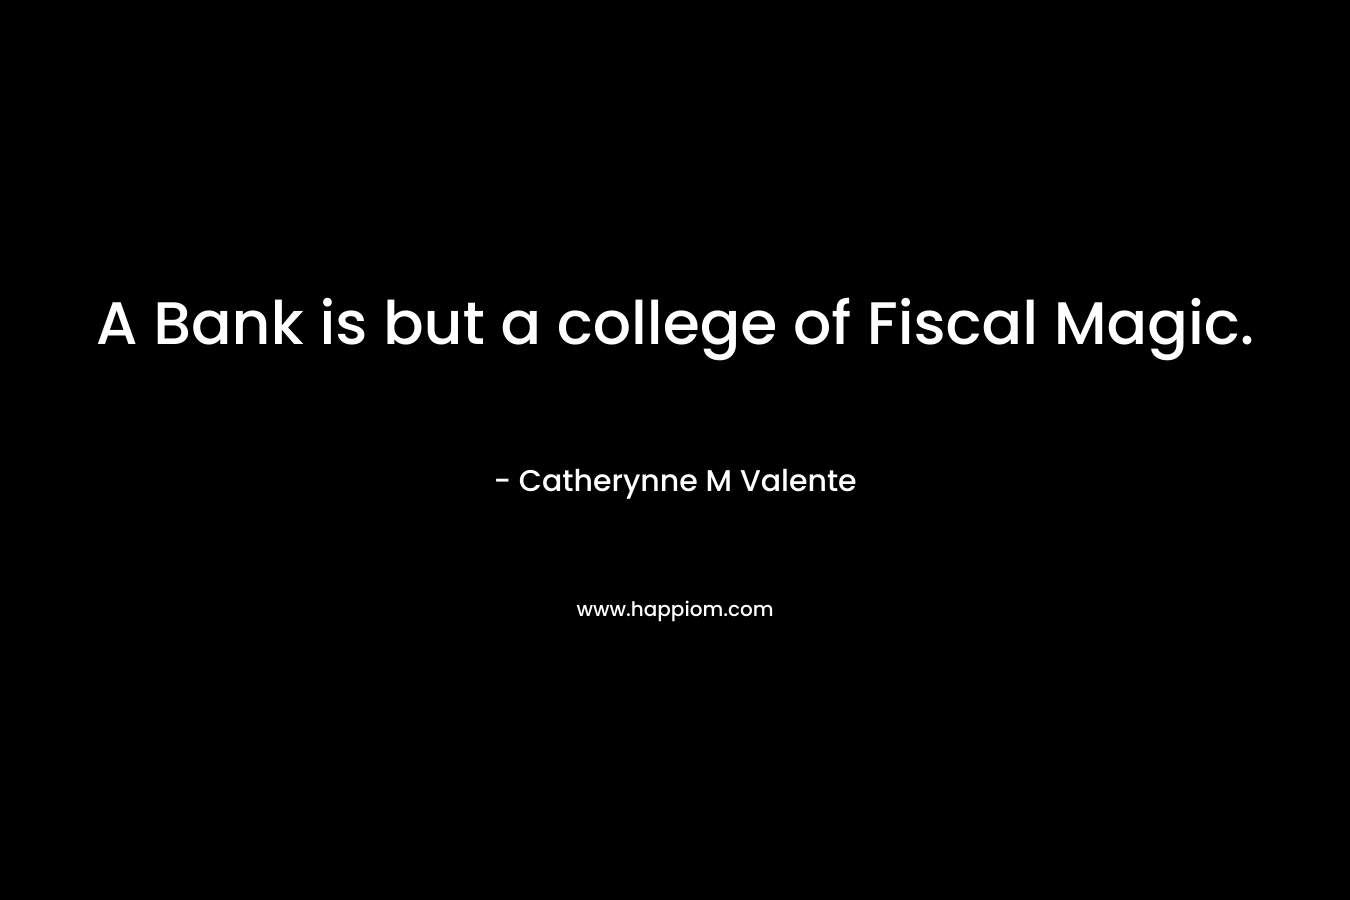 A Bank is but a college of Fiscal Magic. – Catherynne M Valente